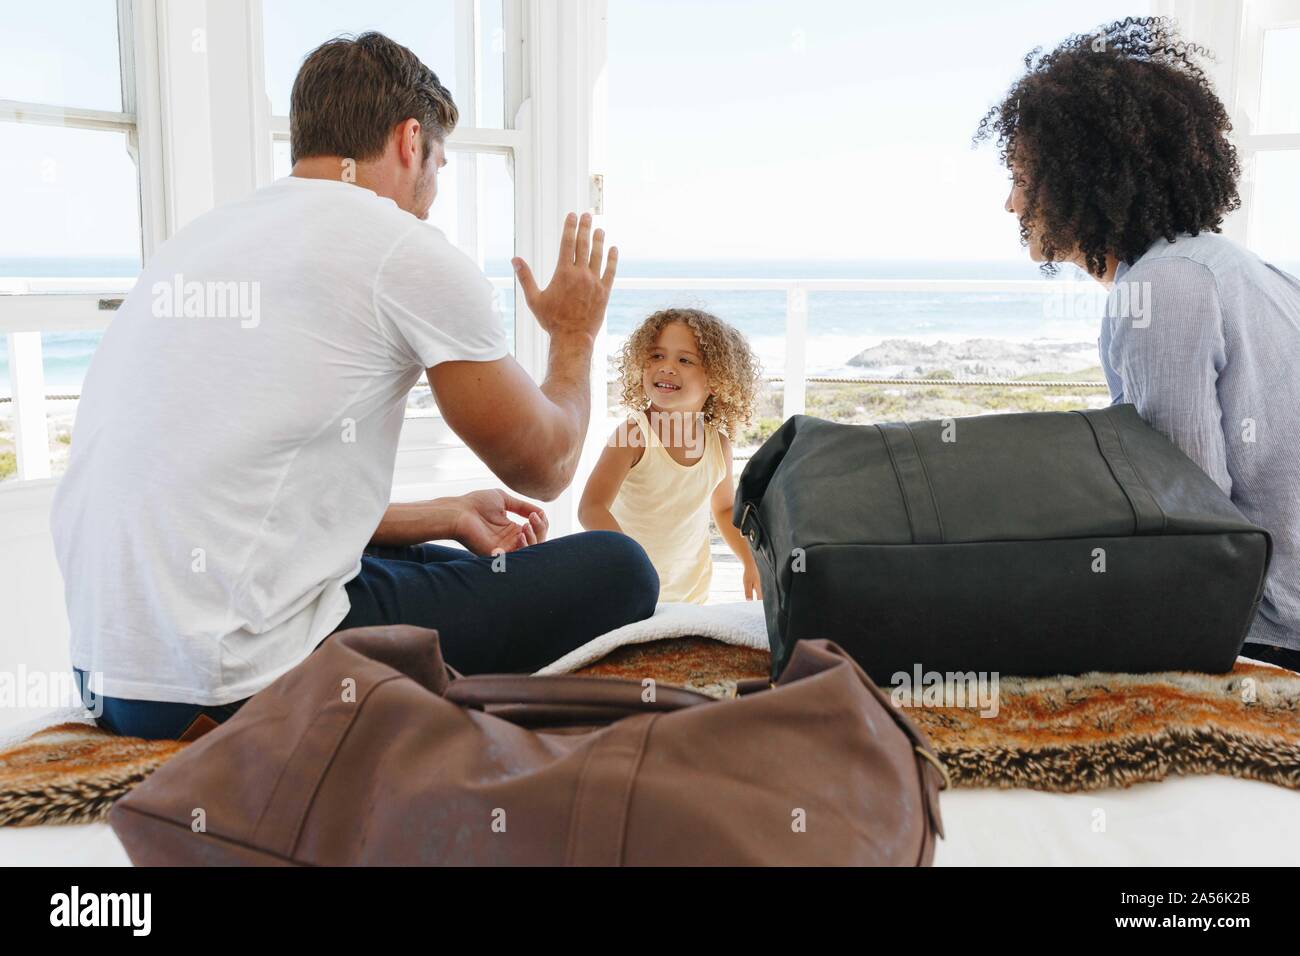 Woman watching husband giving high five to daughter in beach house Stock Photo